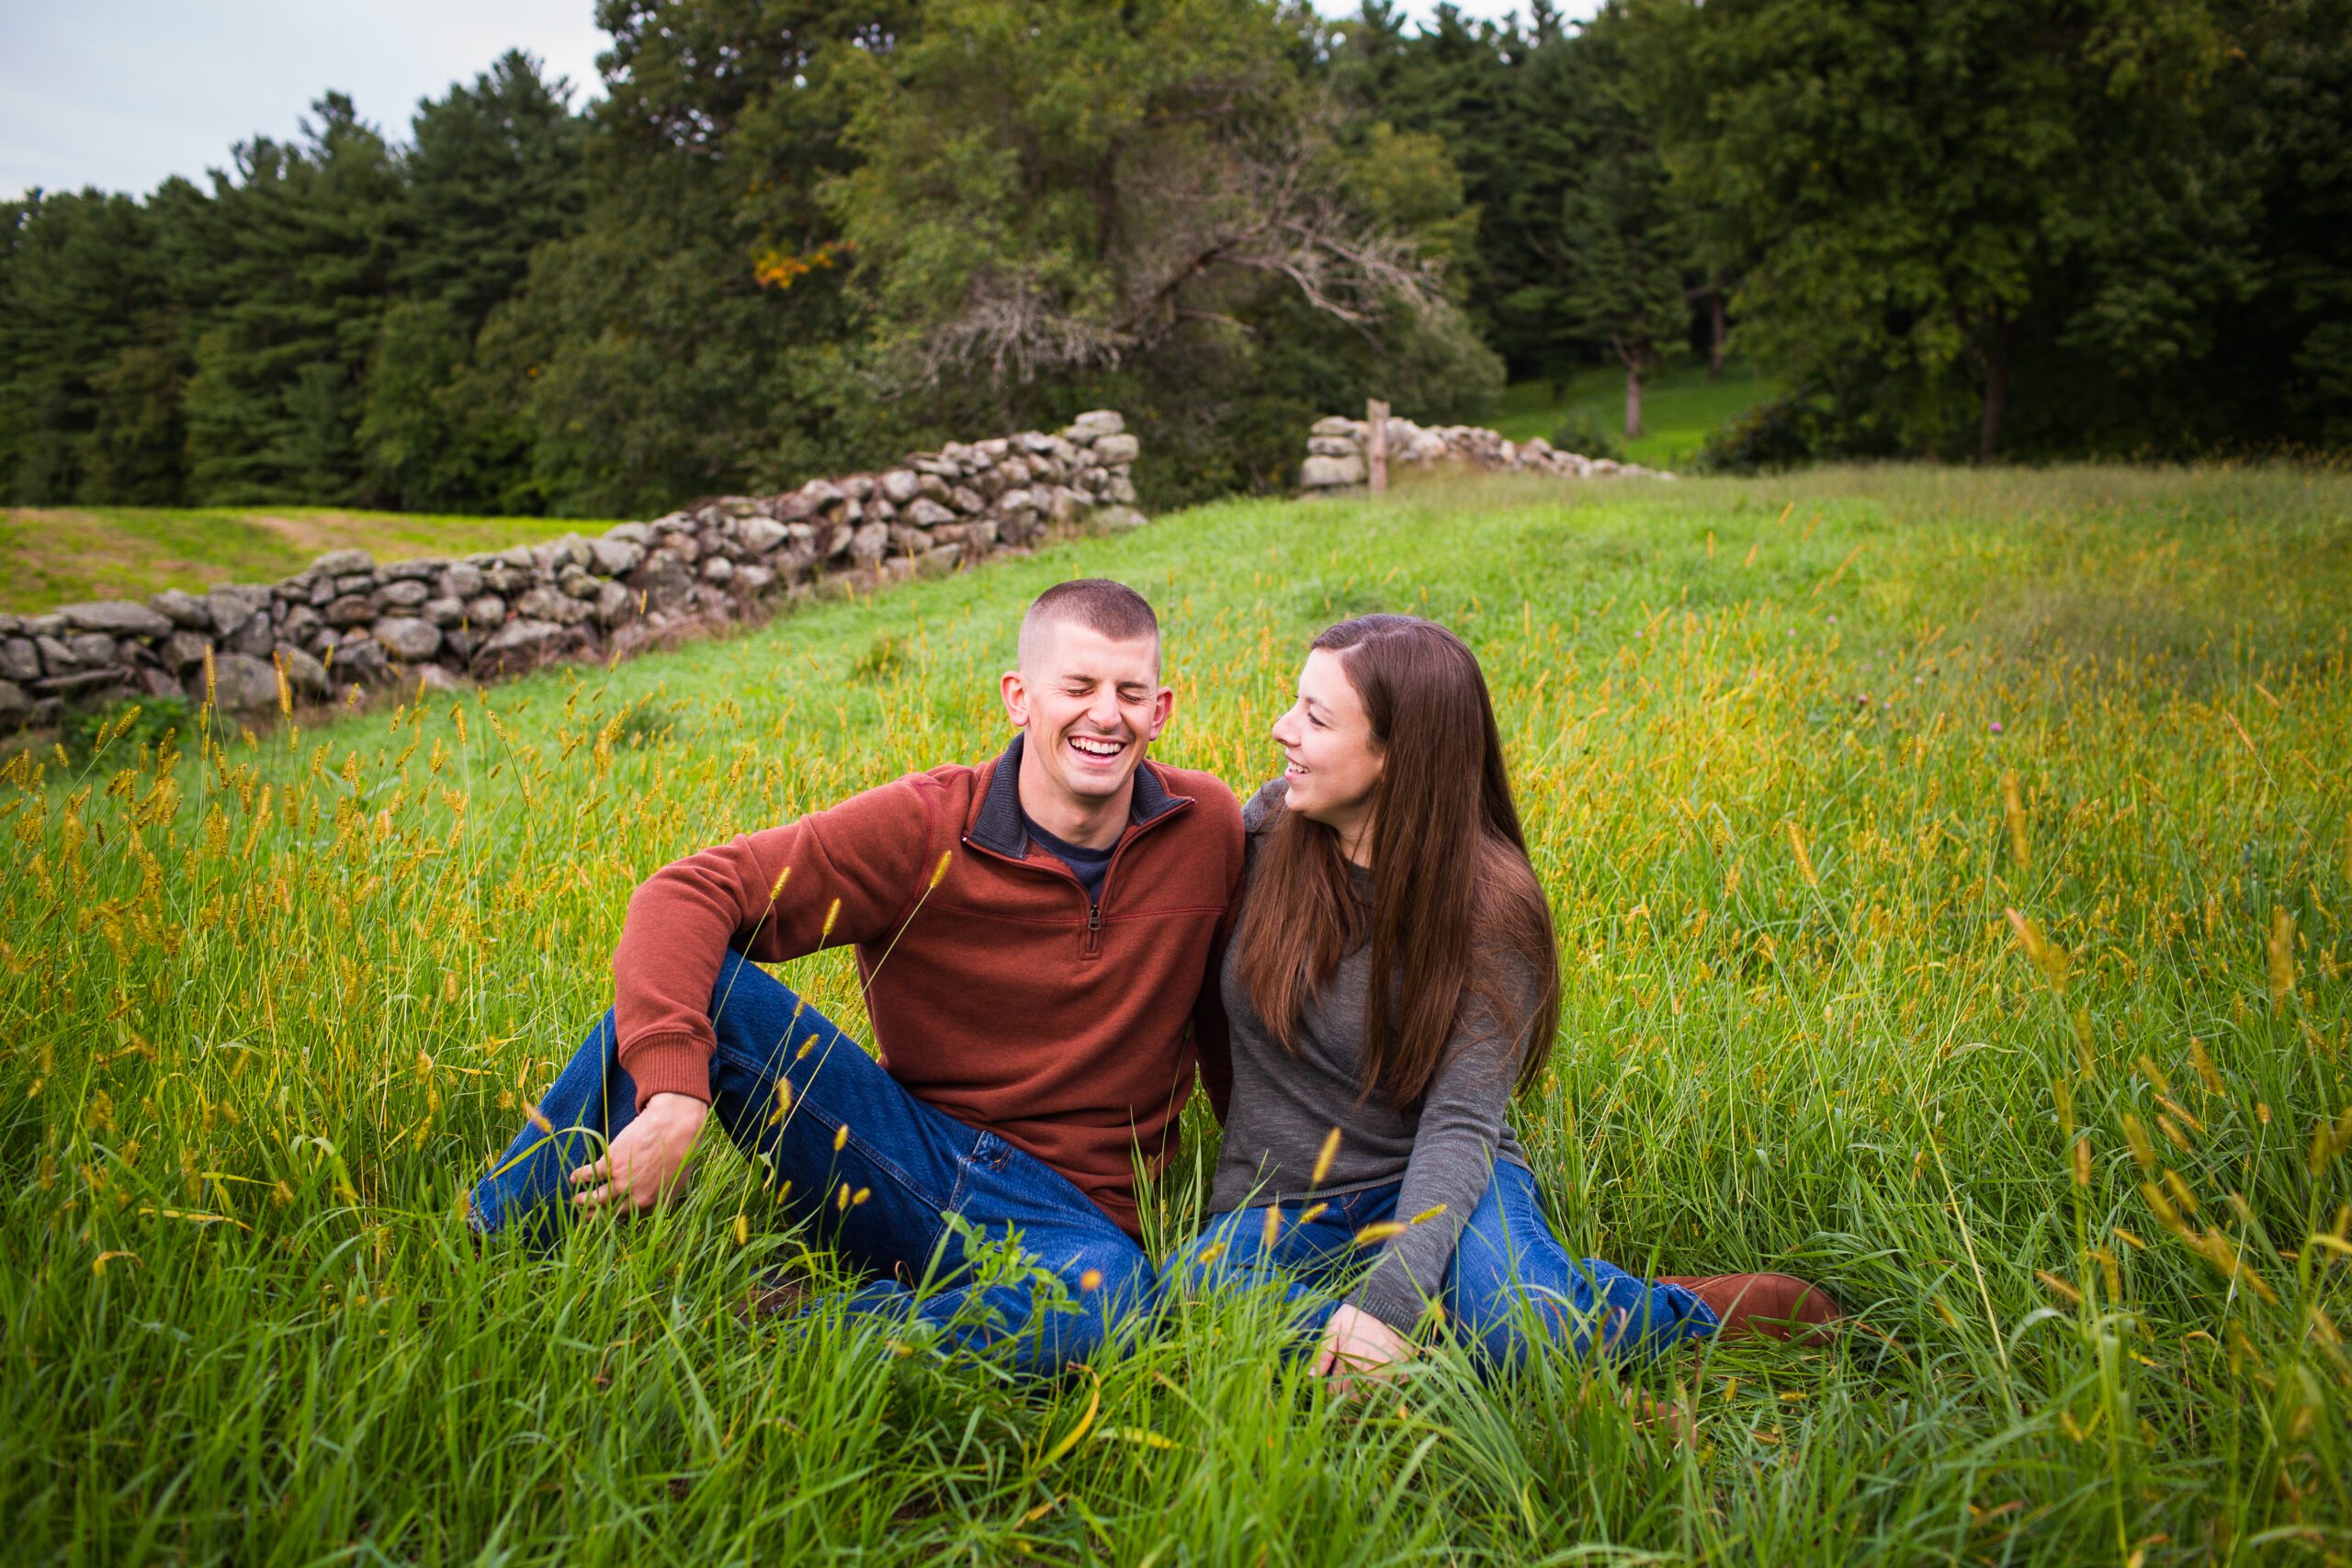 crystal-brook-farm-sterling-ma-photography-session